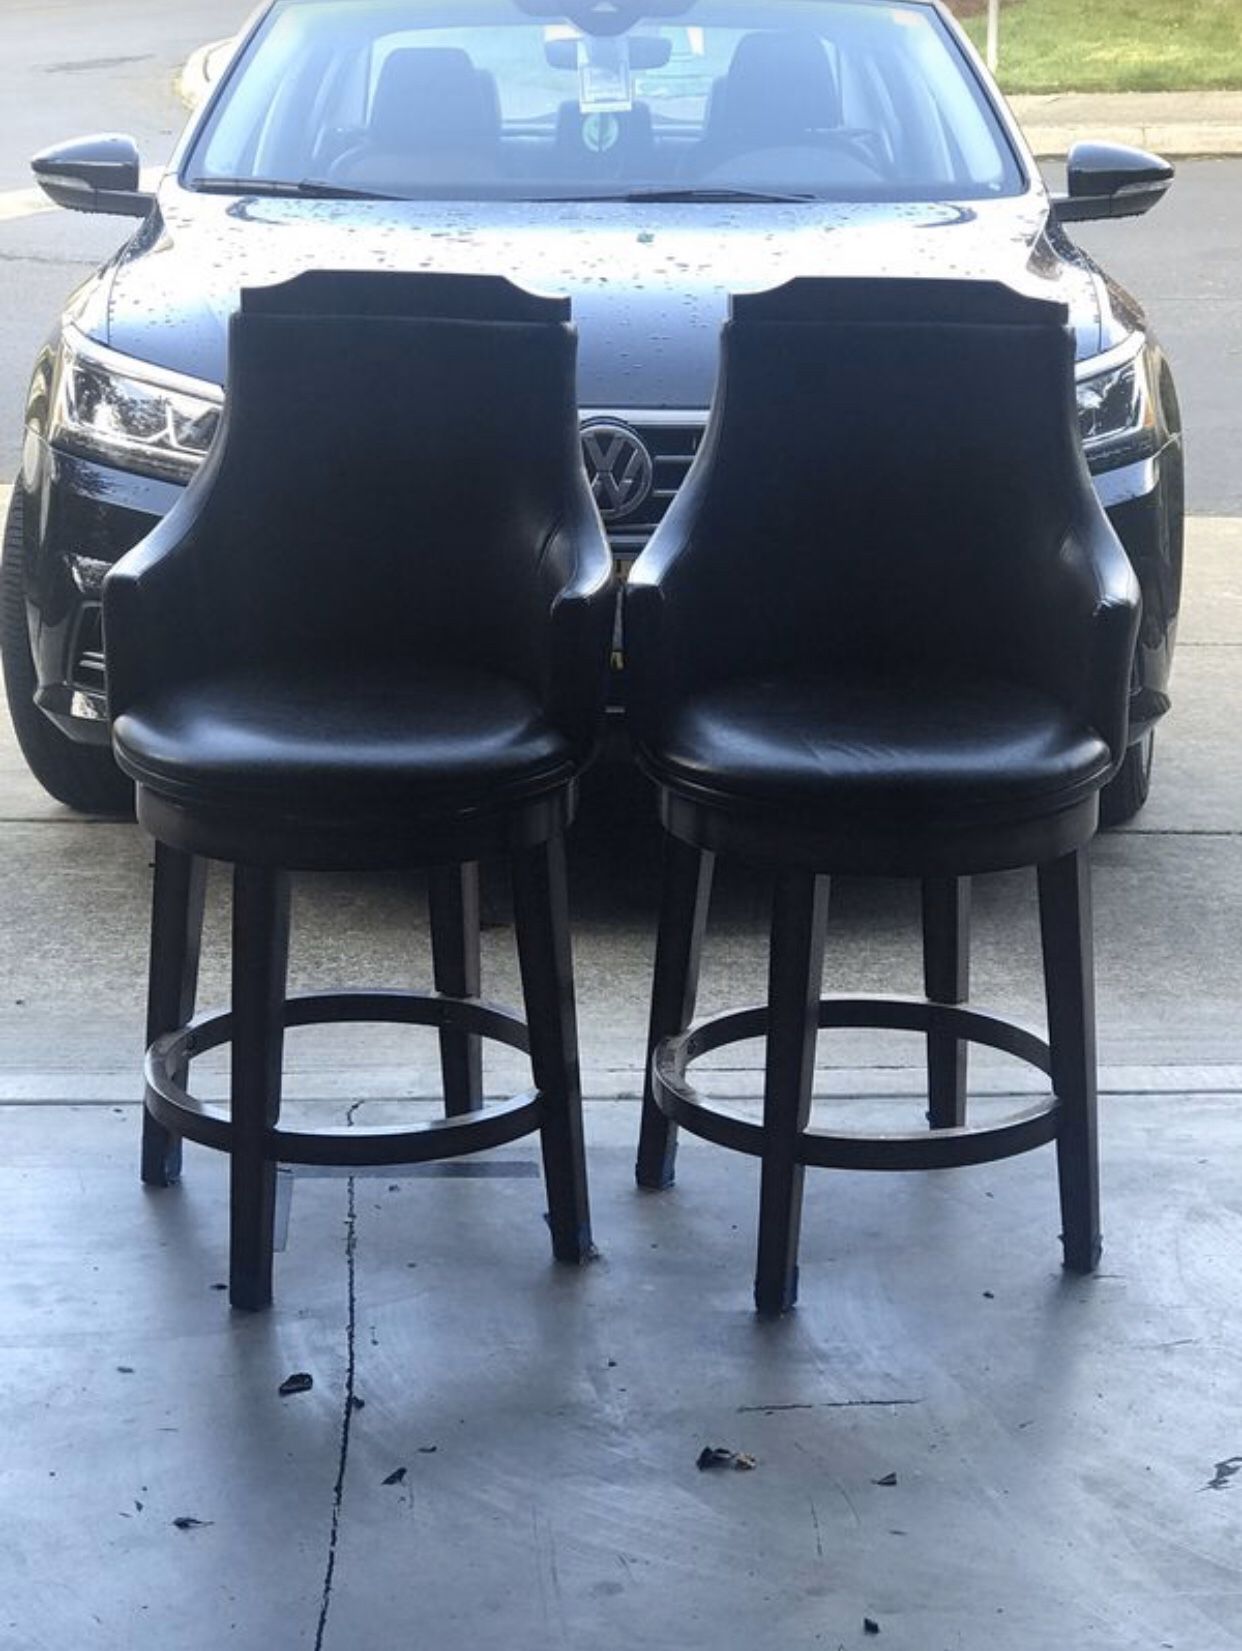 2 chair (They Spin)